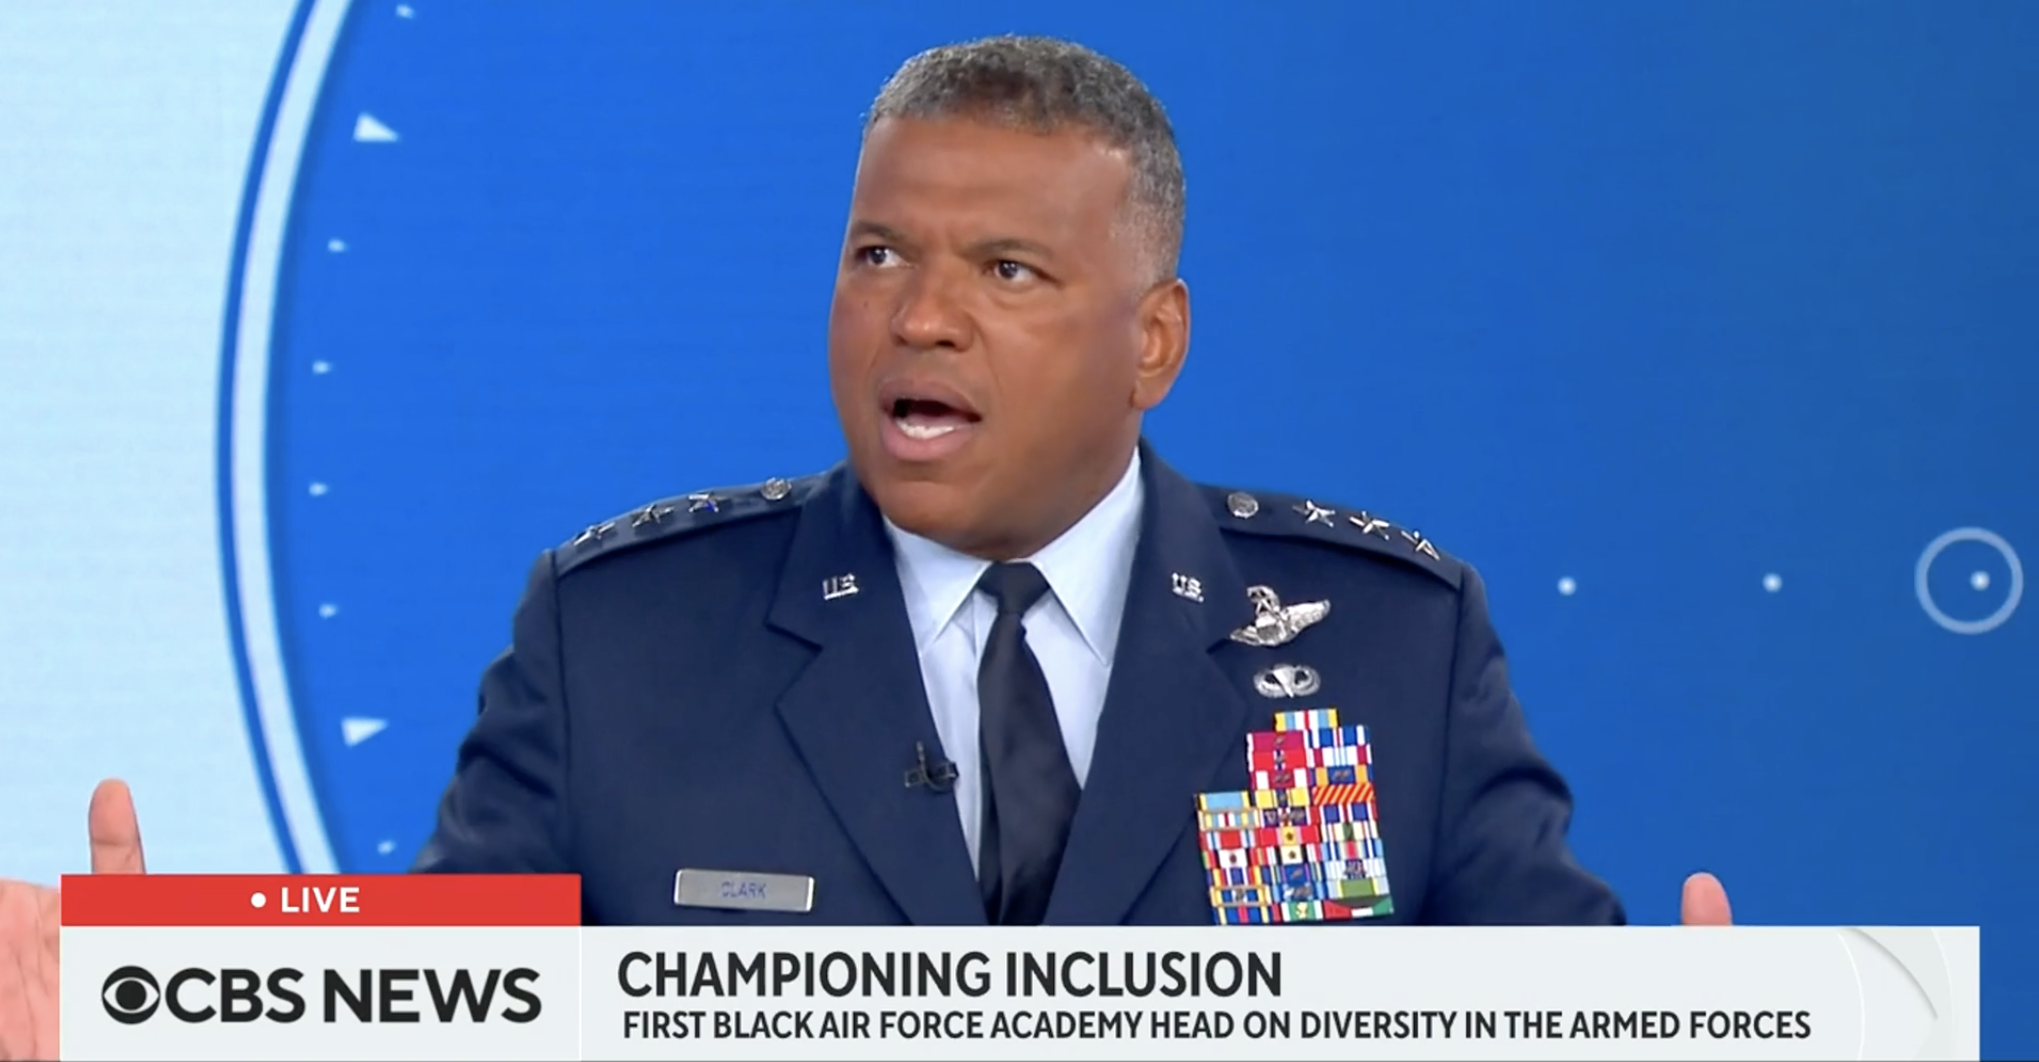 USAFA Superintendent 'Pays It Forward' To The Chinese Communist Party By Pushing Their Agenda